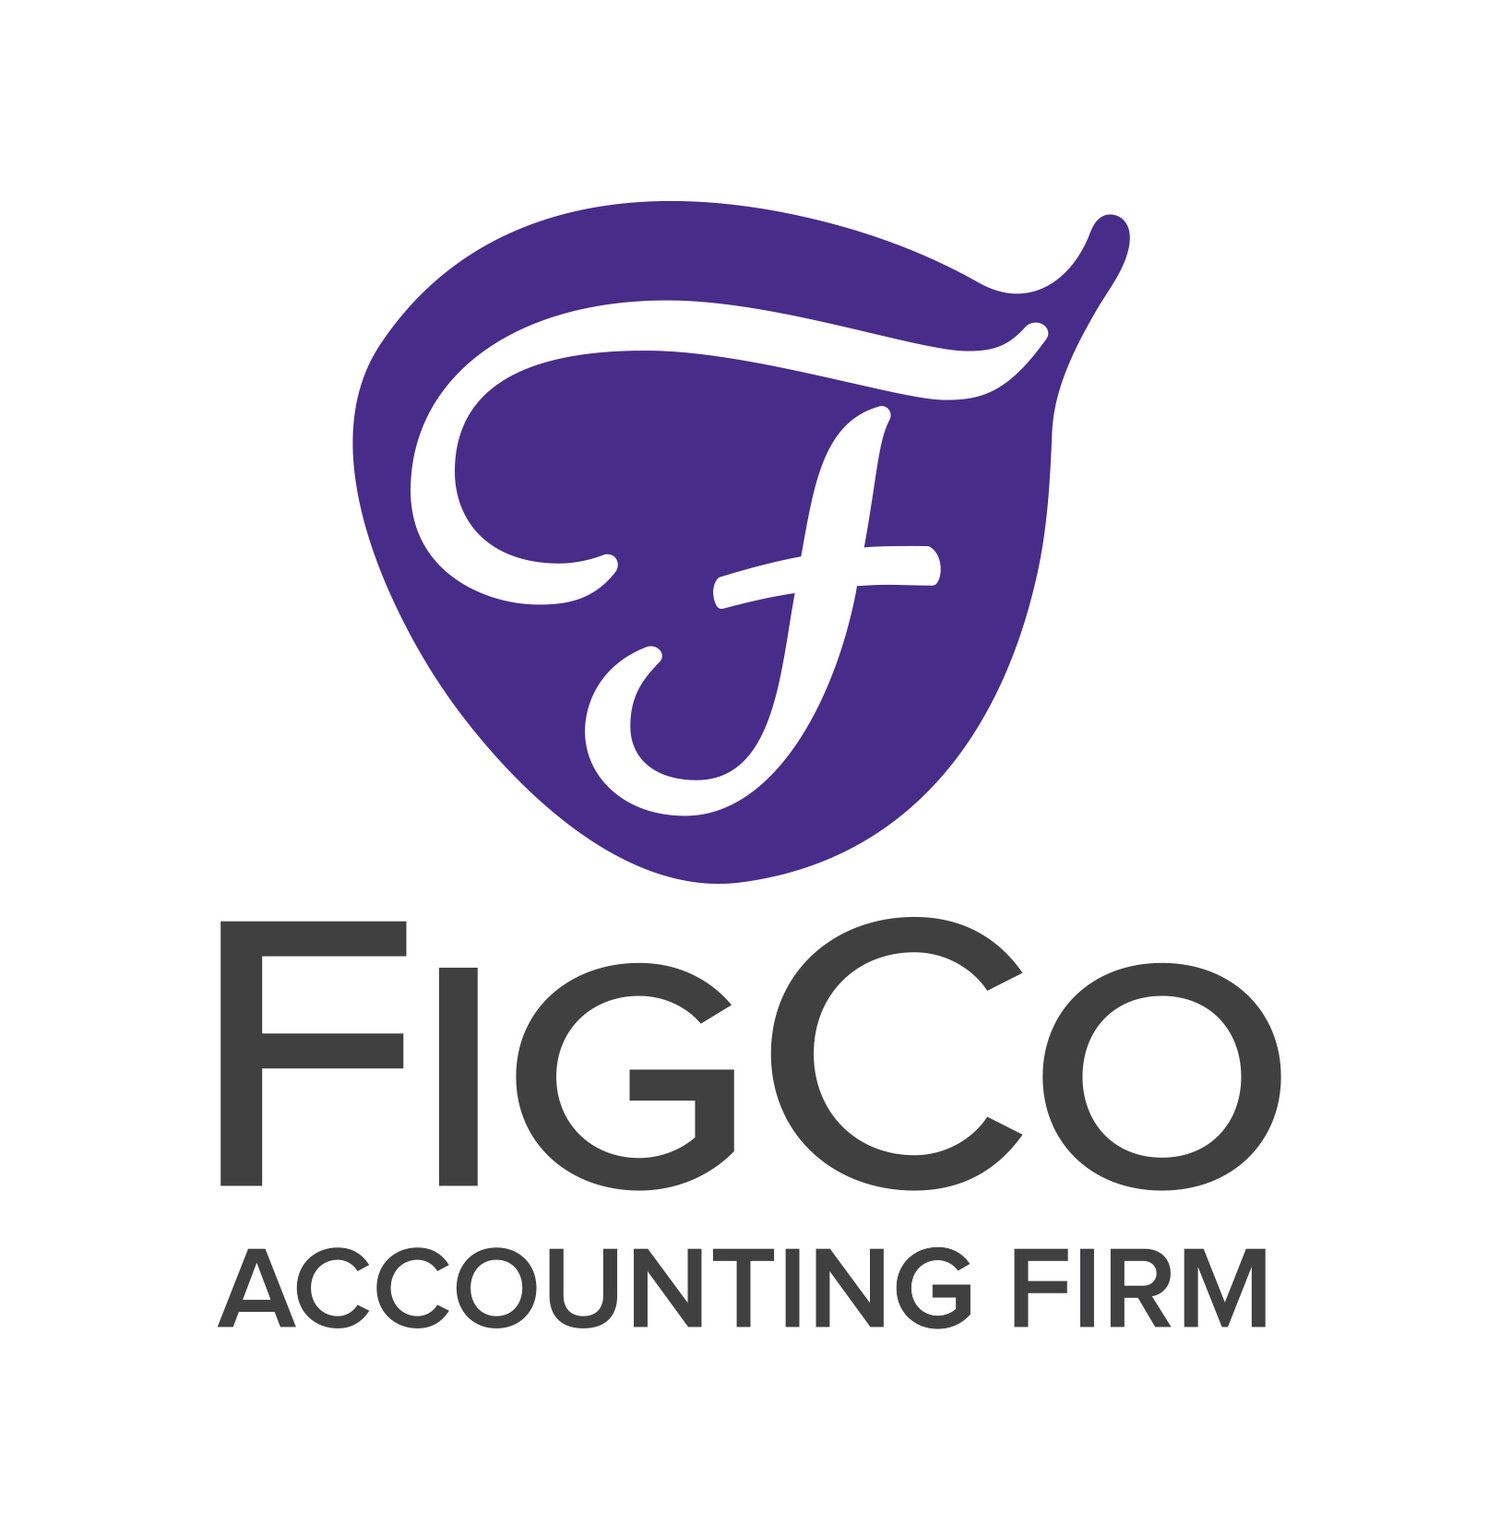 FIGCO Accounting FIRM